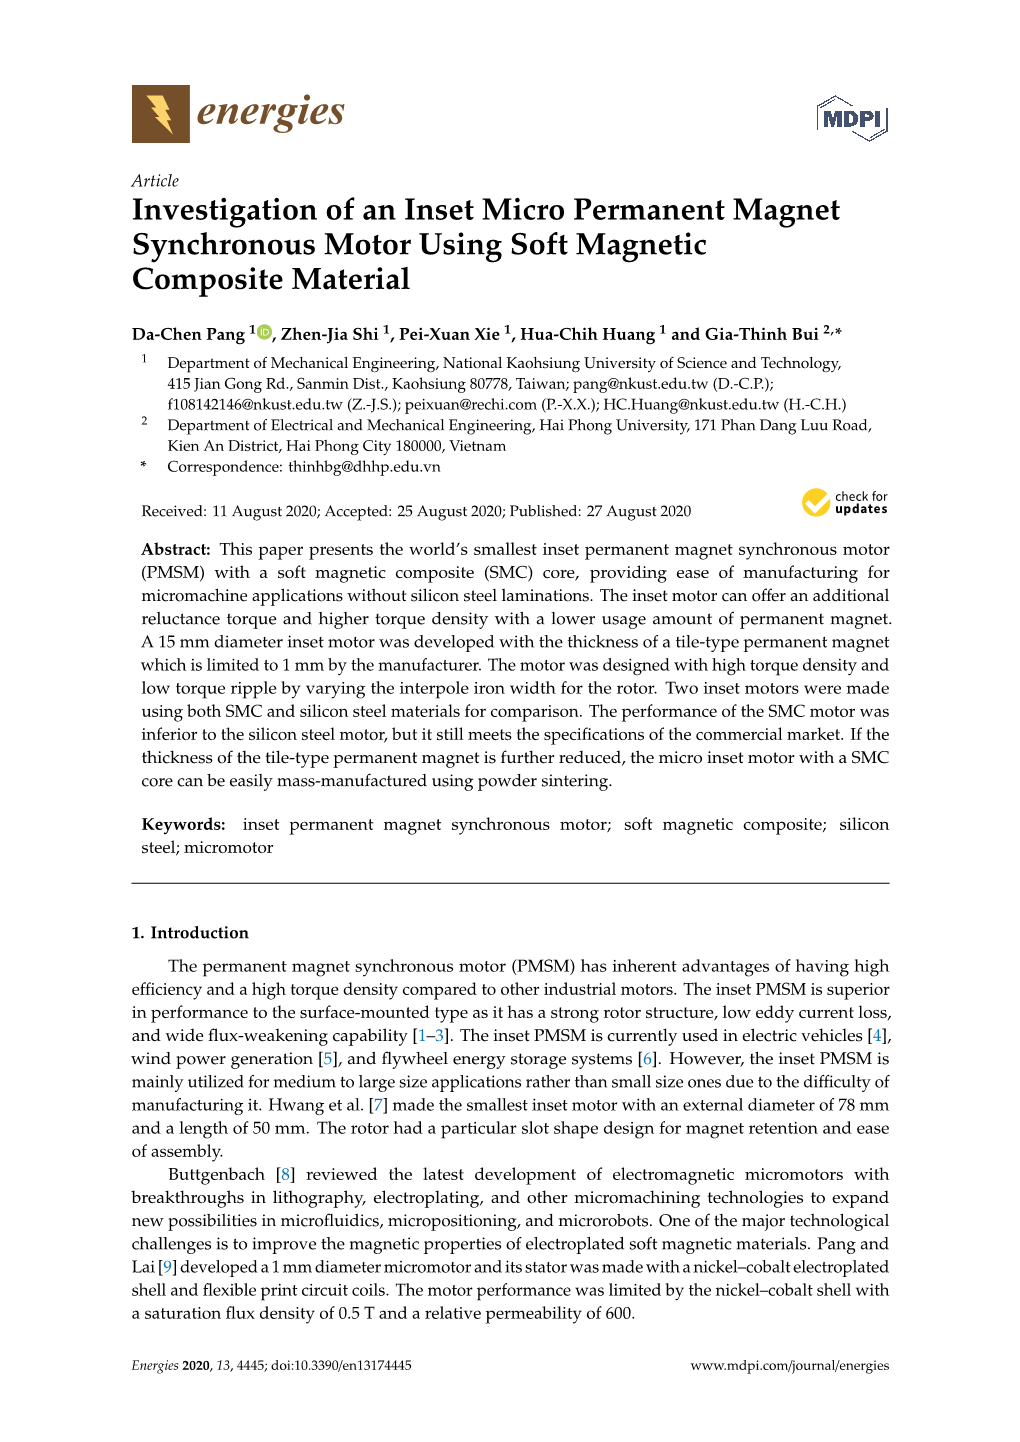 Investigation of an Inset Micro Permanent Magnet Synchronous Motor Using Soft Magnetic Composite Material